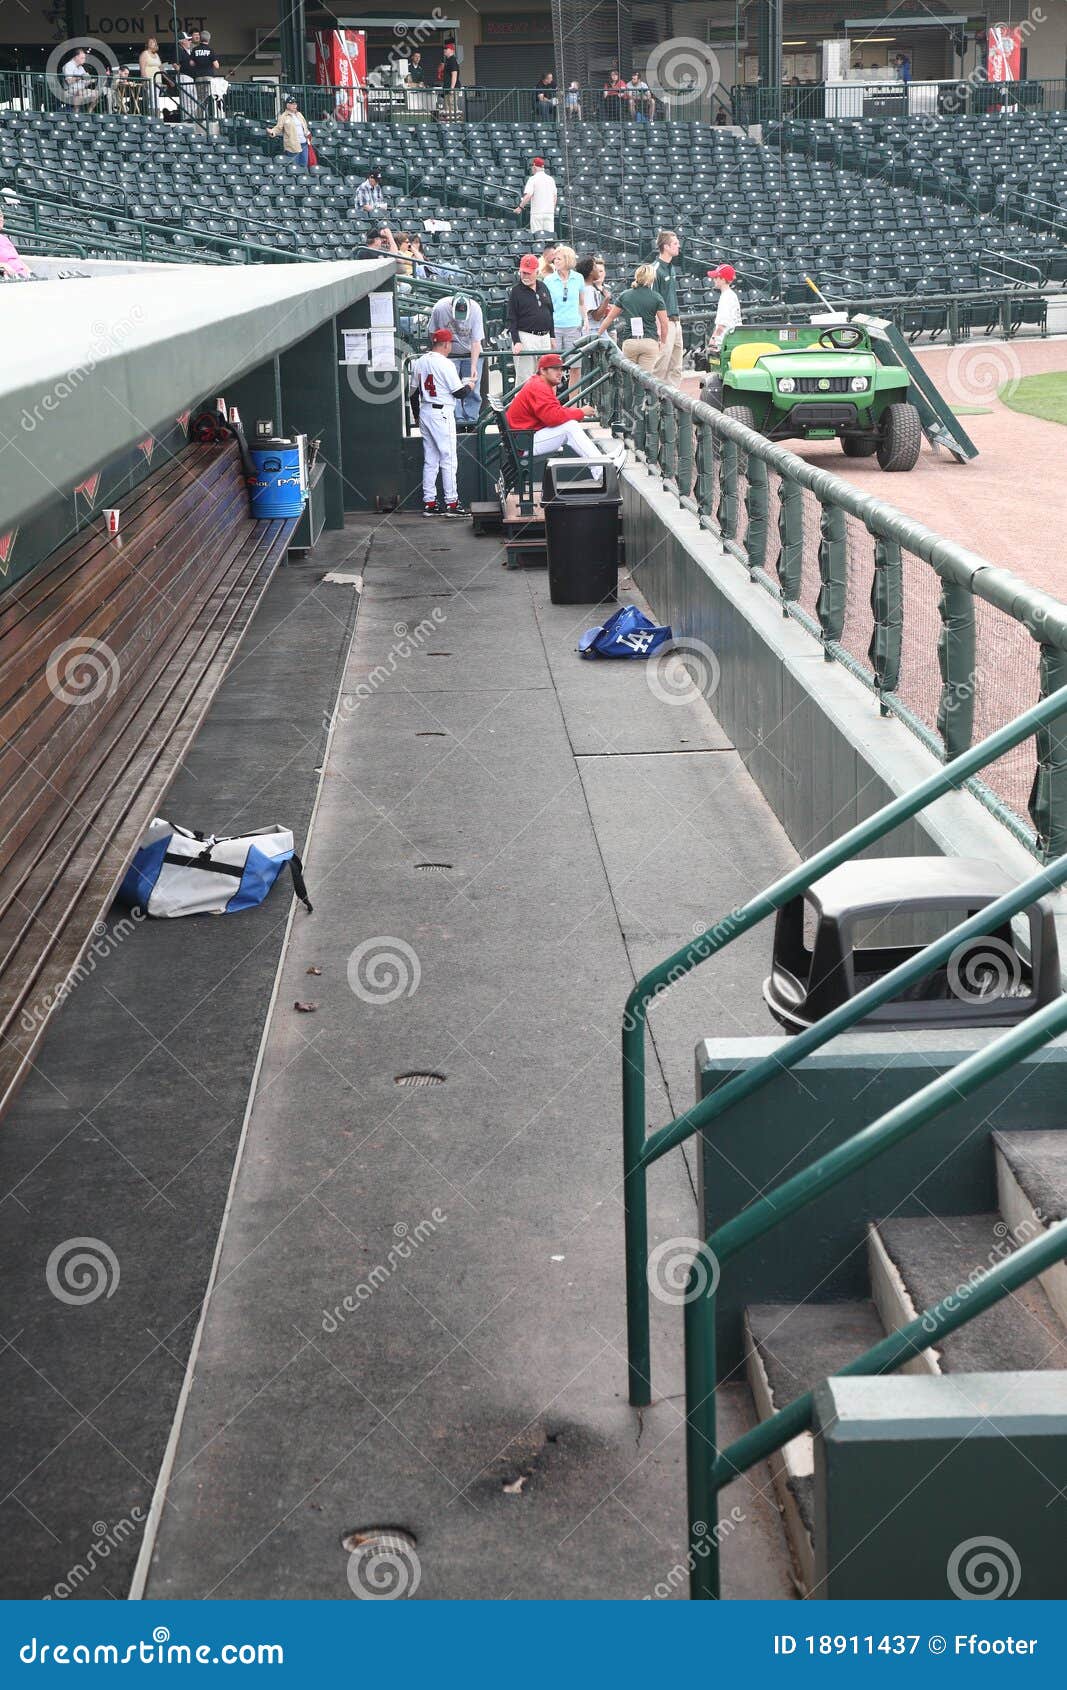 Baseball Stadium Dugout. Pre-game dugout for the minor league baseball team Great Lakes Loons in Midland Michigan.